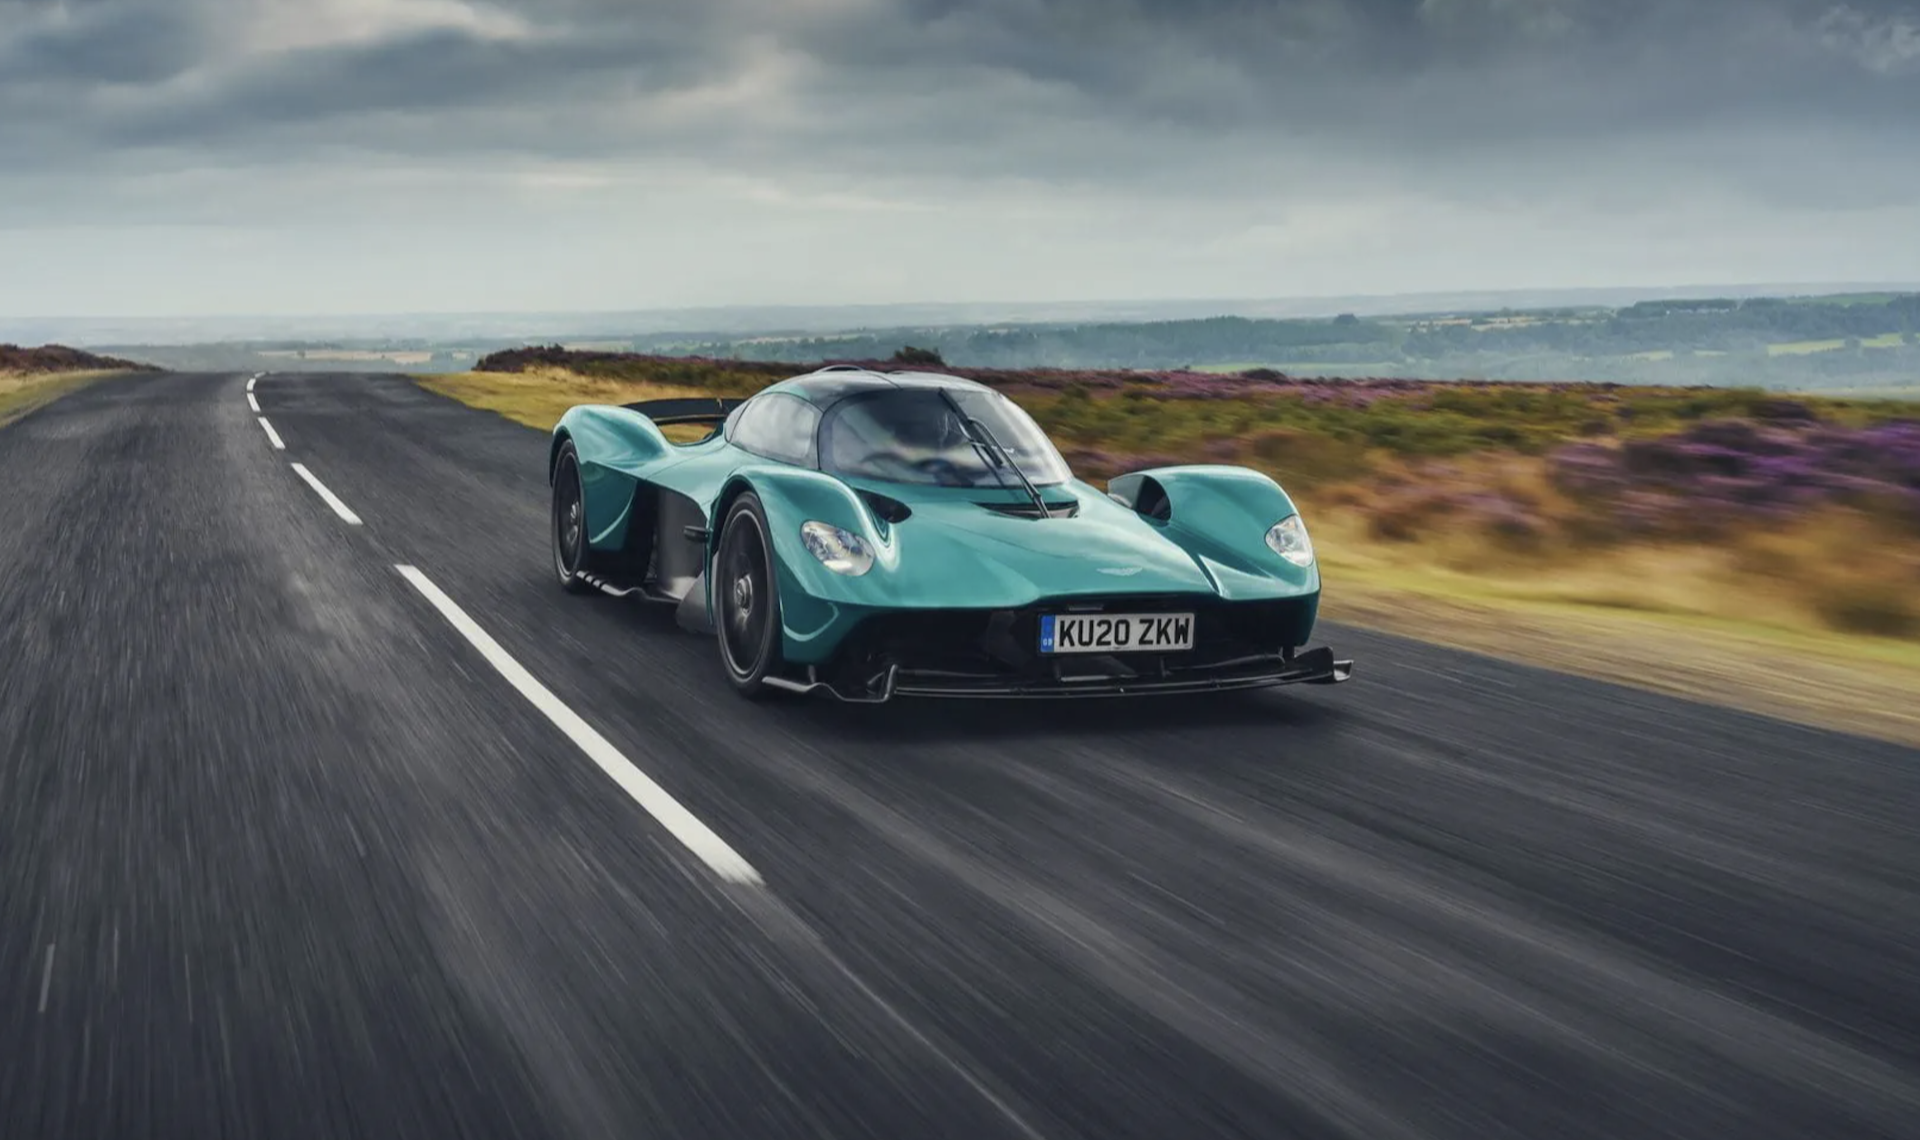 Inside the Advanced Braking System of the Aston Martin Valkyrie